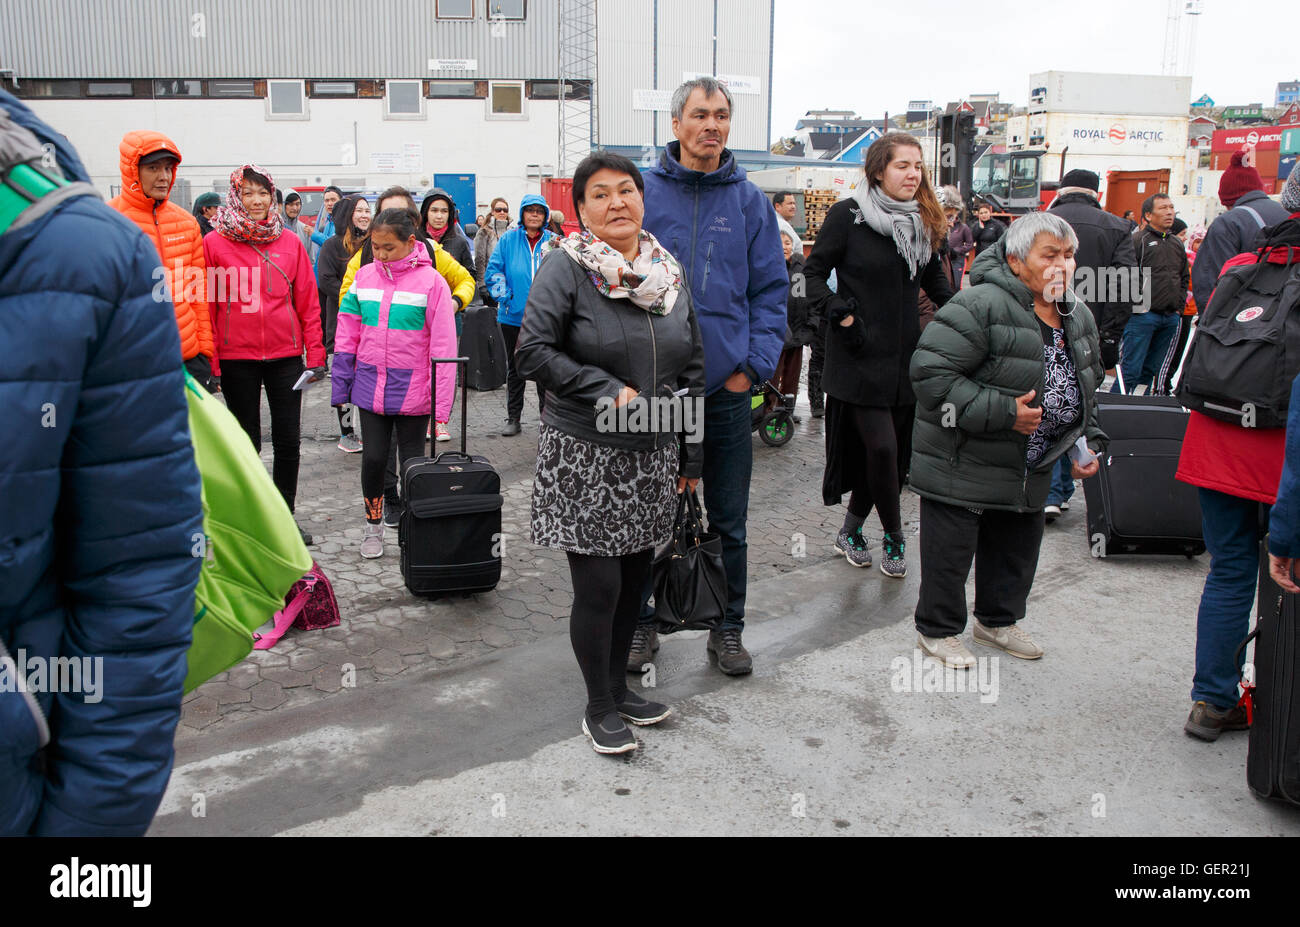 People wait for arrivals at the ferry port, Aasiaat, Greenland Stock Photo